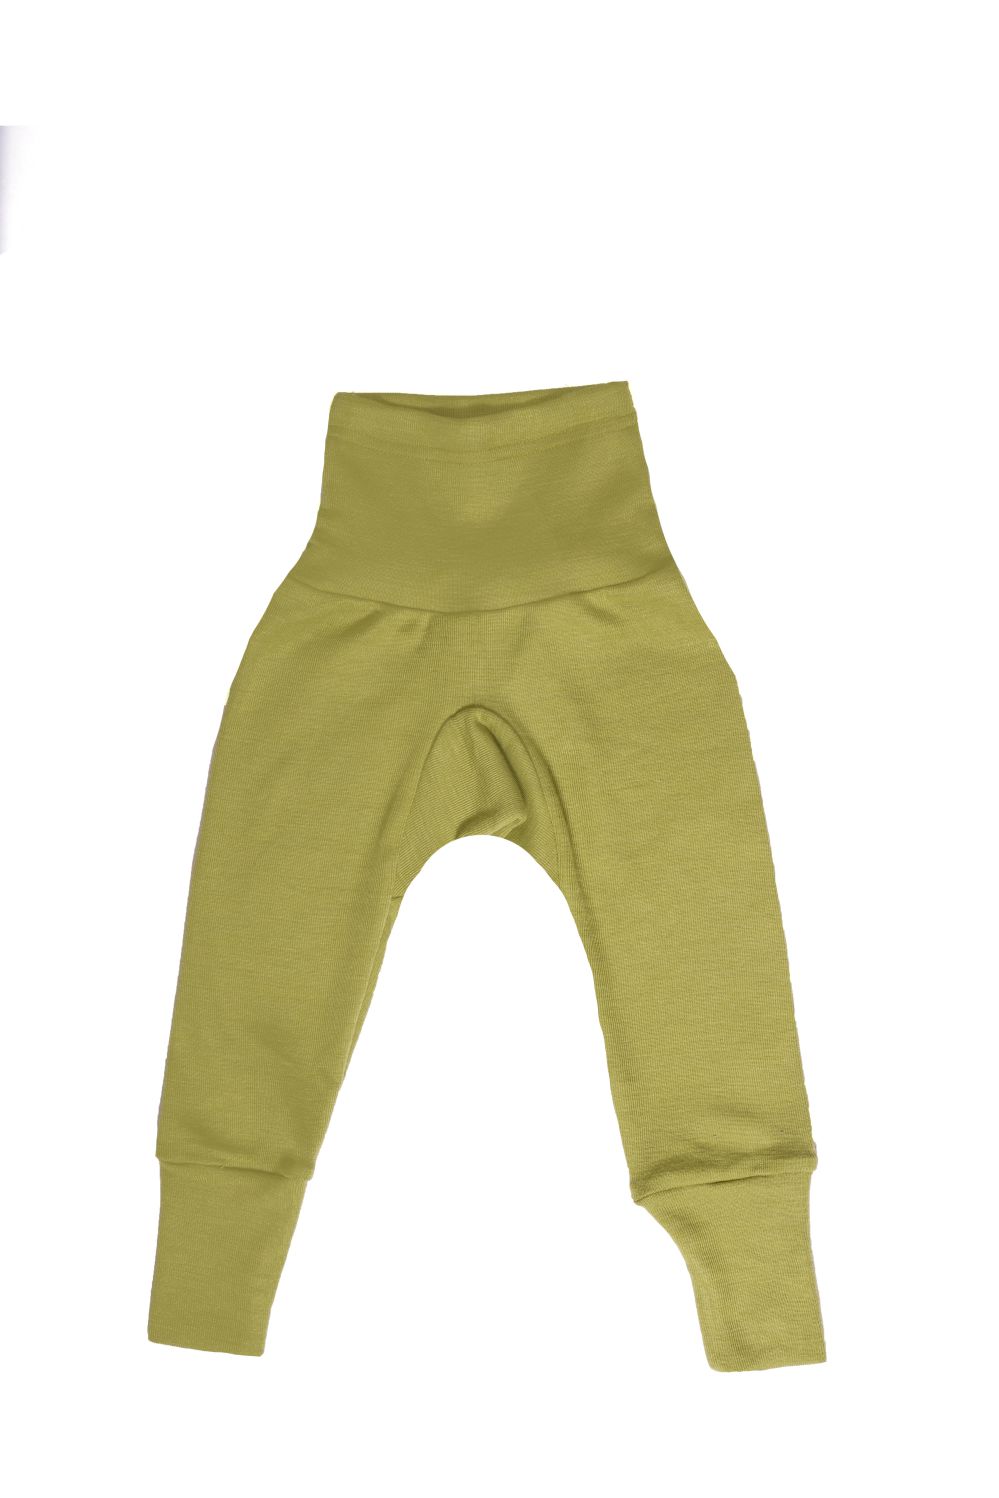 Cosilana baby pants with waistband (wool/silk) (Size: 050/056 / Colour: 21 green)